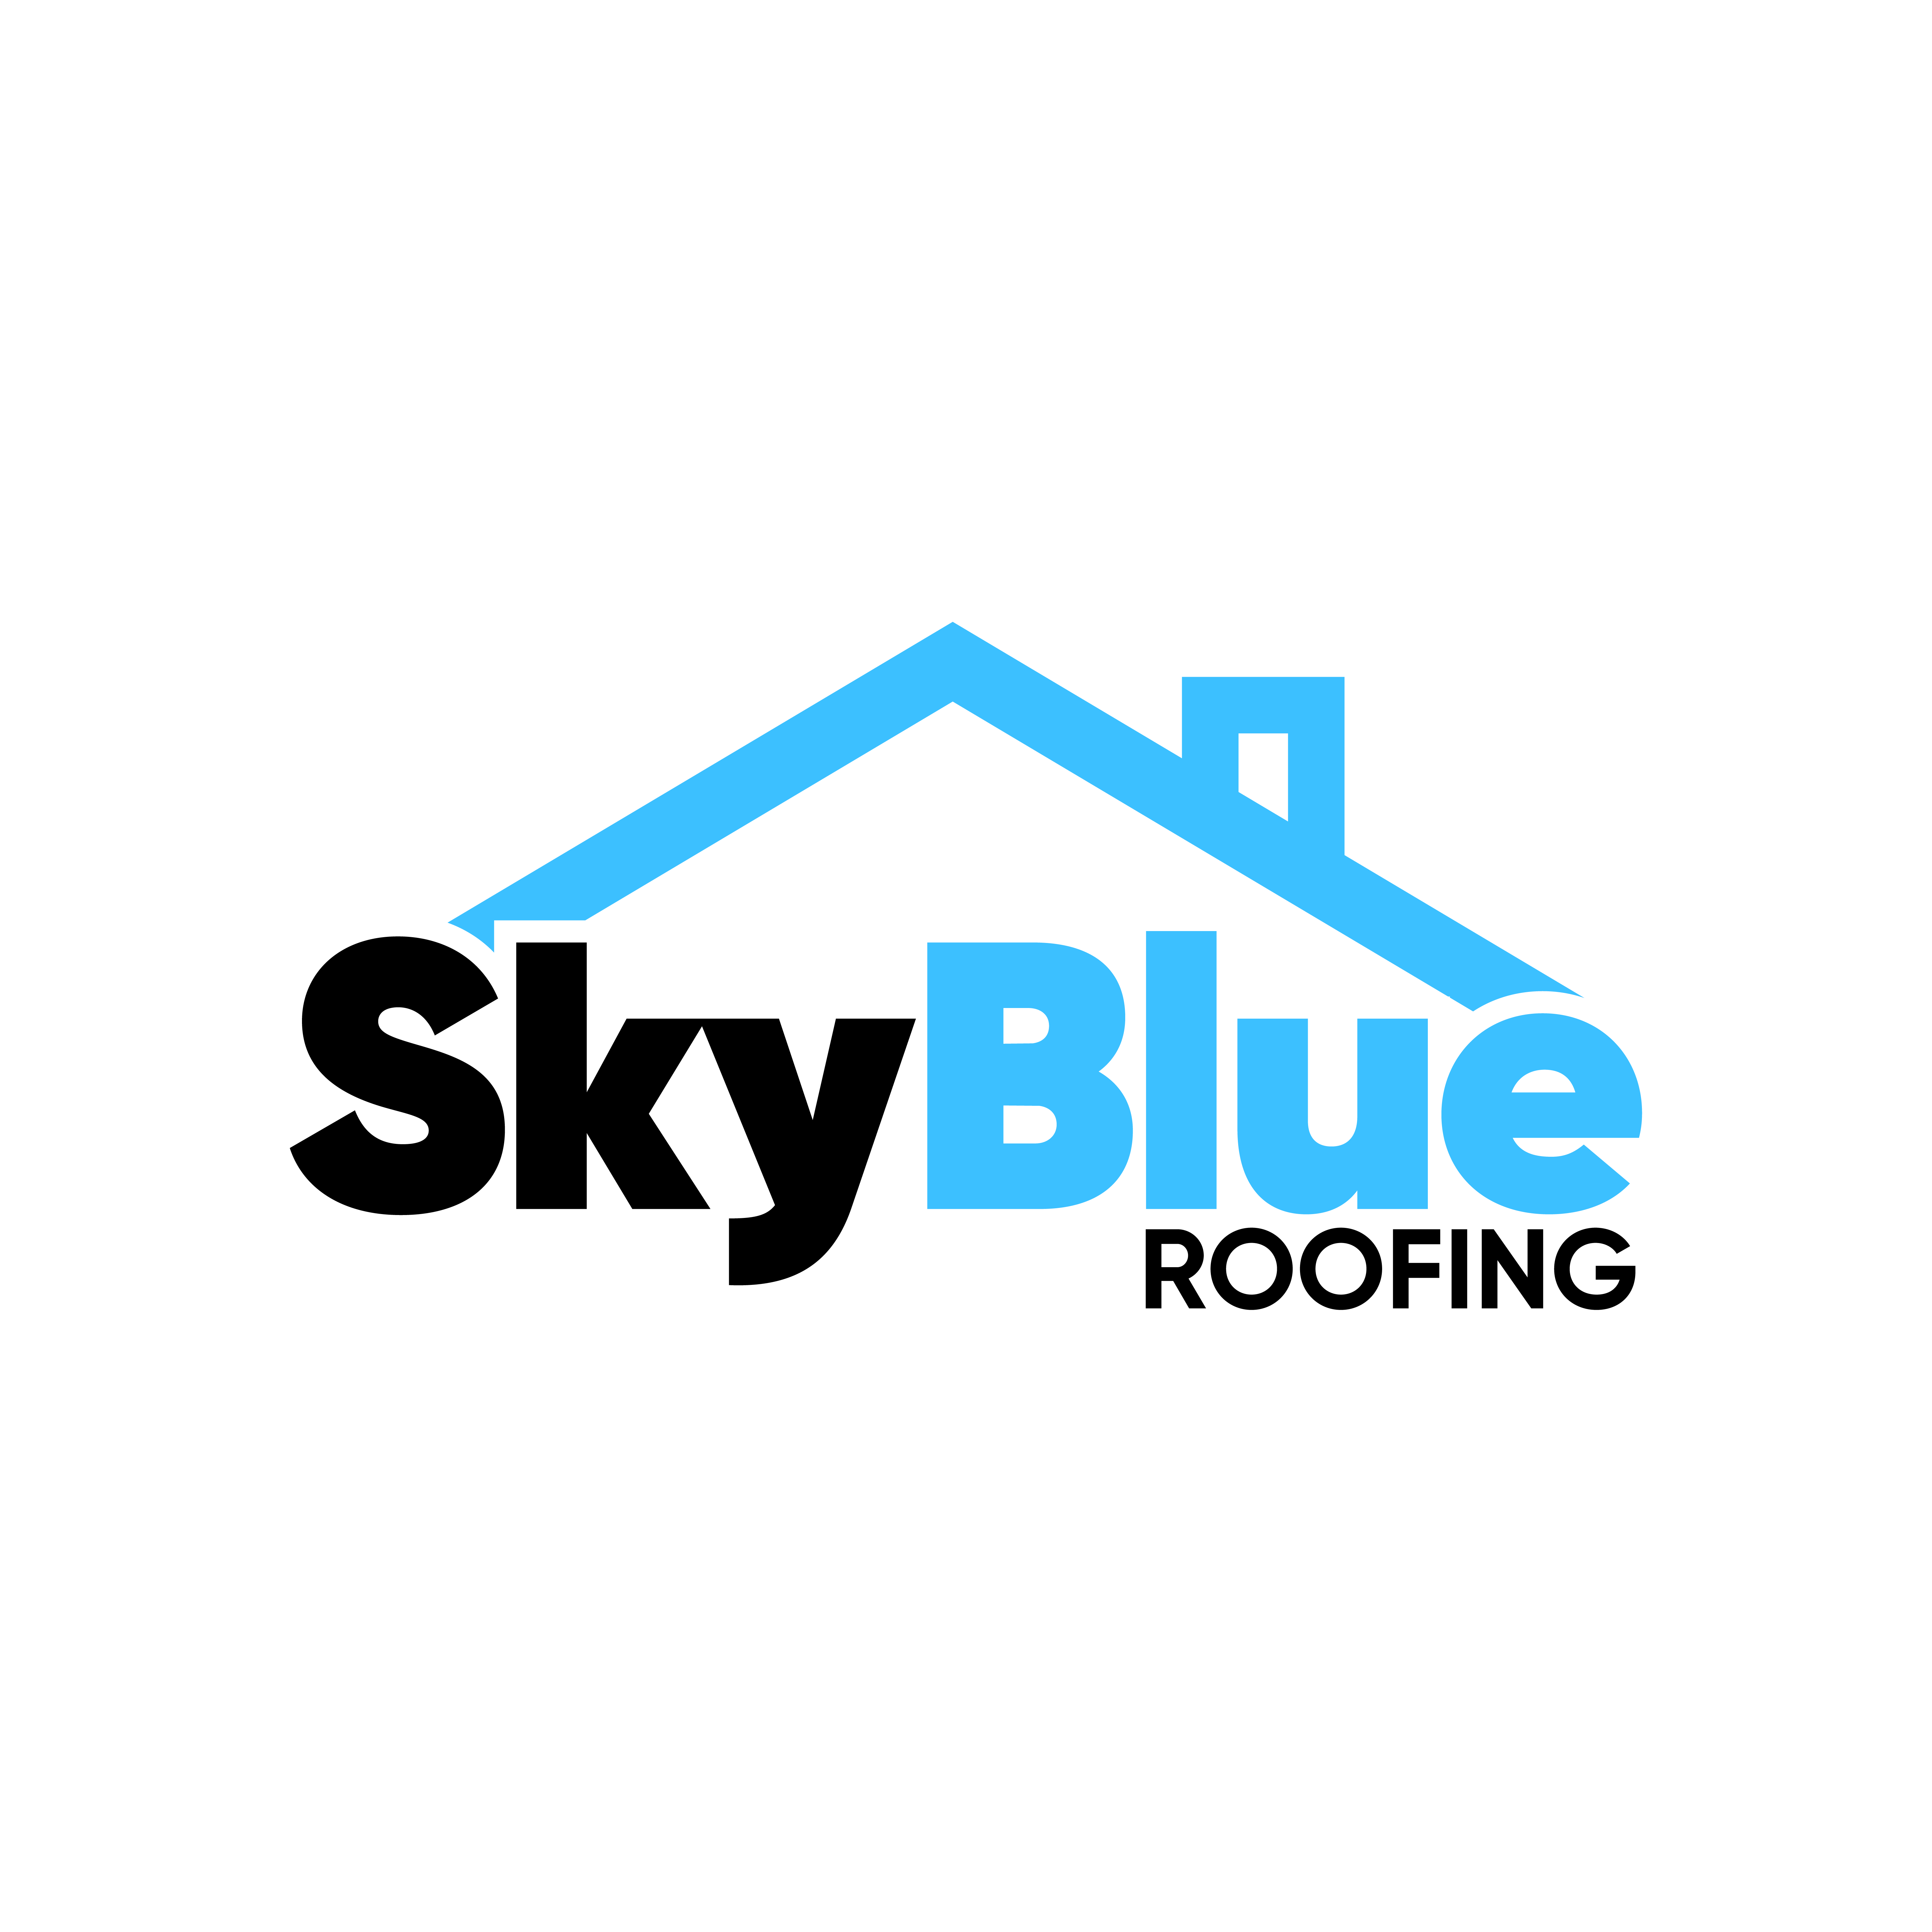 Skyblue Roofing Logo